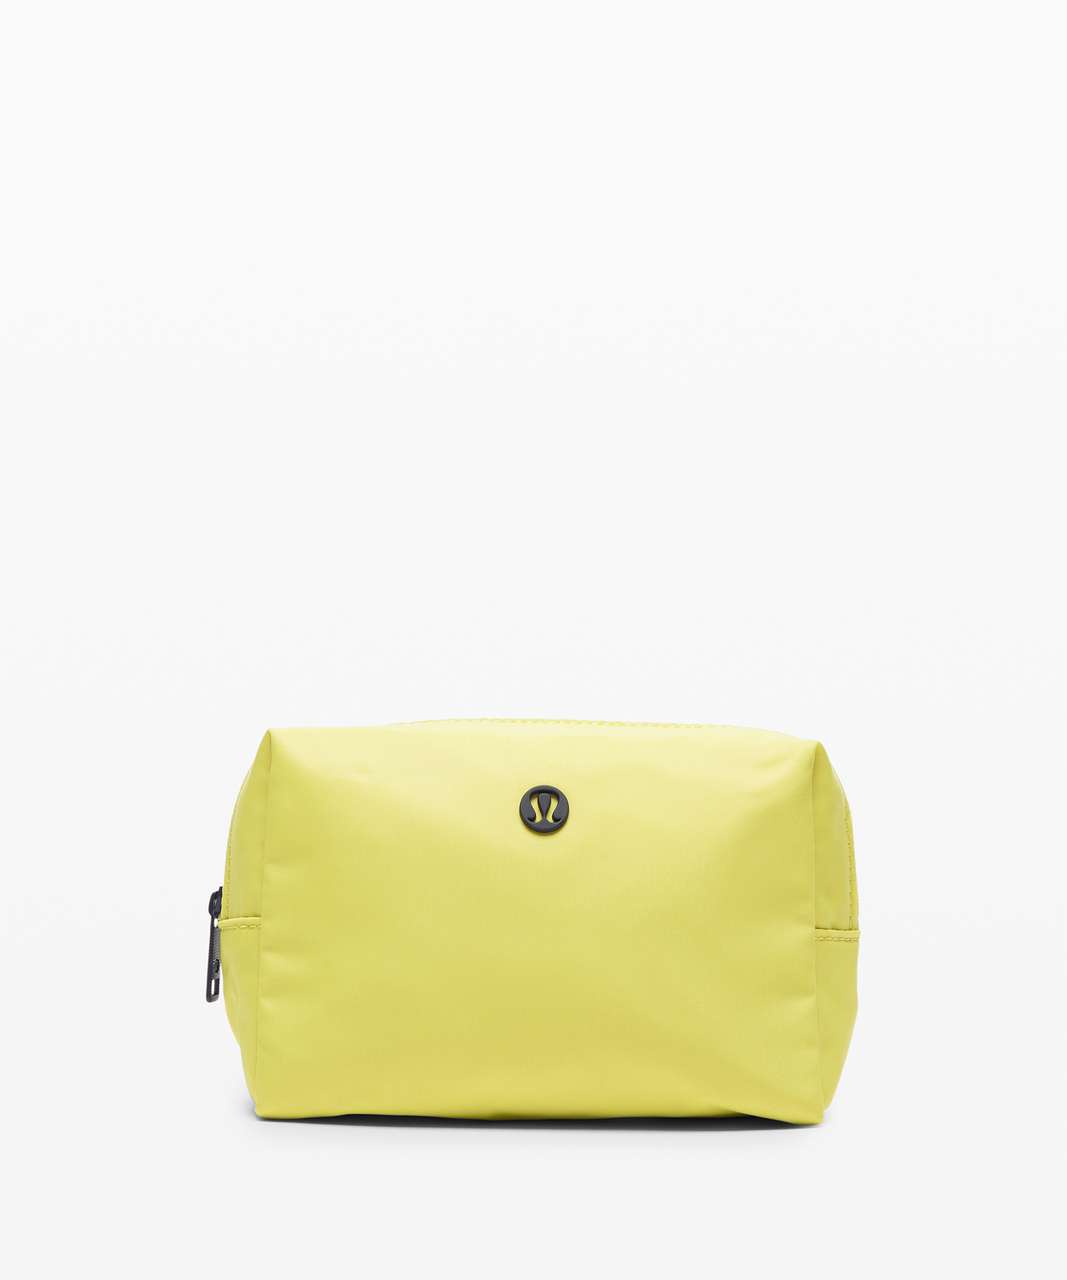 Lululemon All Your Small Things Pouch *Mini 2L - Lemon Vibe